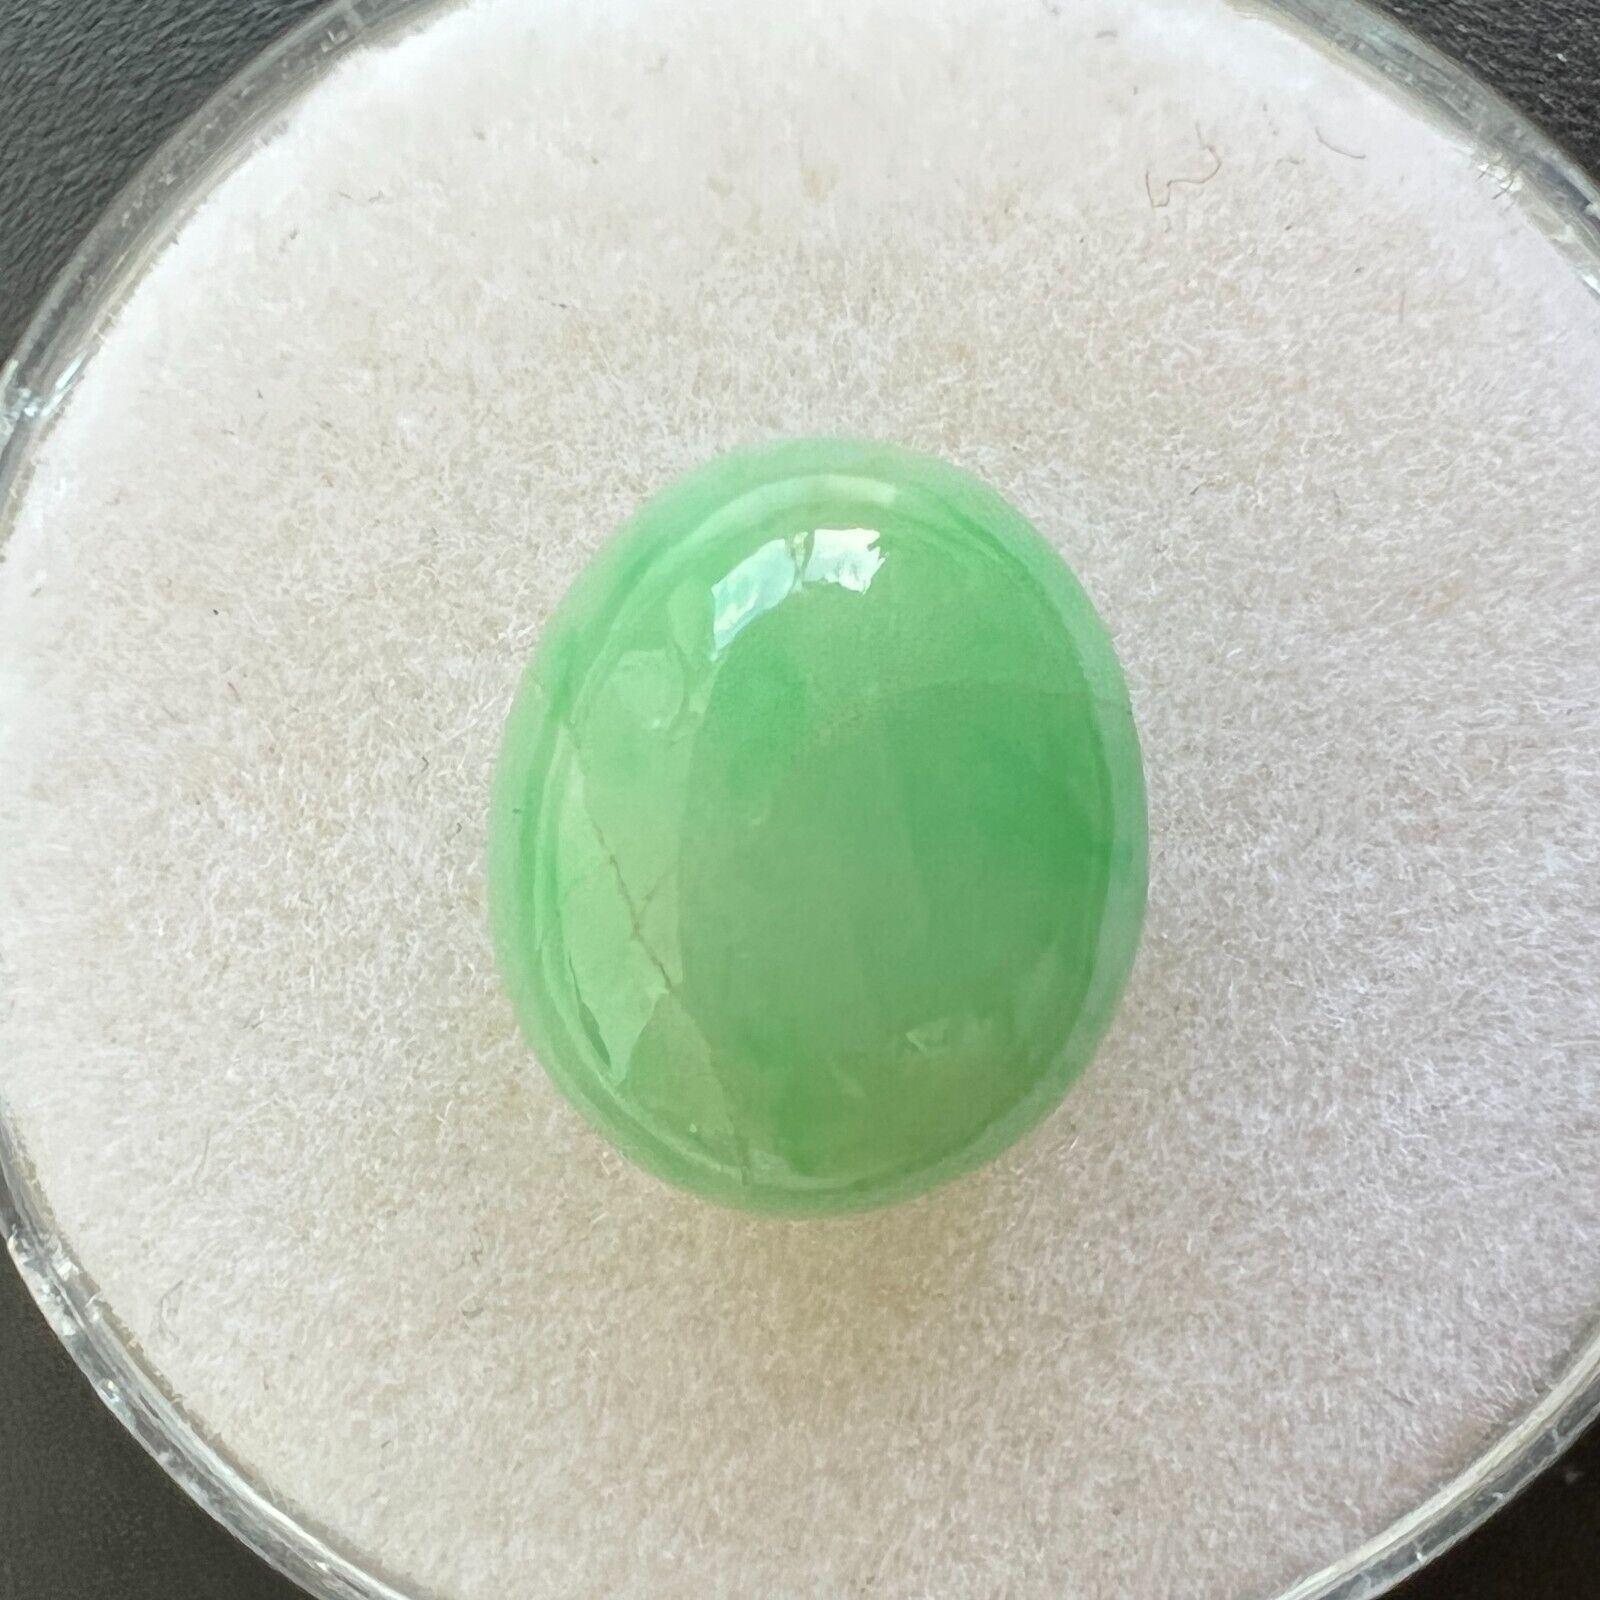 Oval Cut 4.58 Carat GIA Certified Green Jadeite Jade ‘A’ Grade Oval Cabochon Untreated For Sale